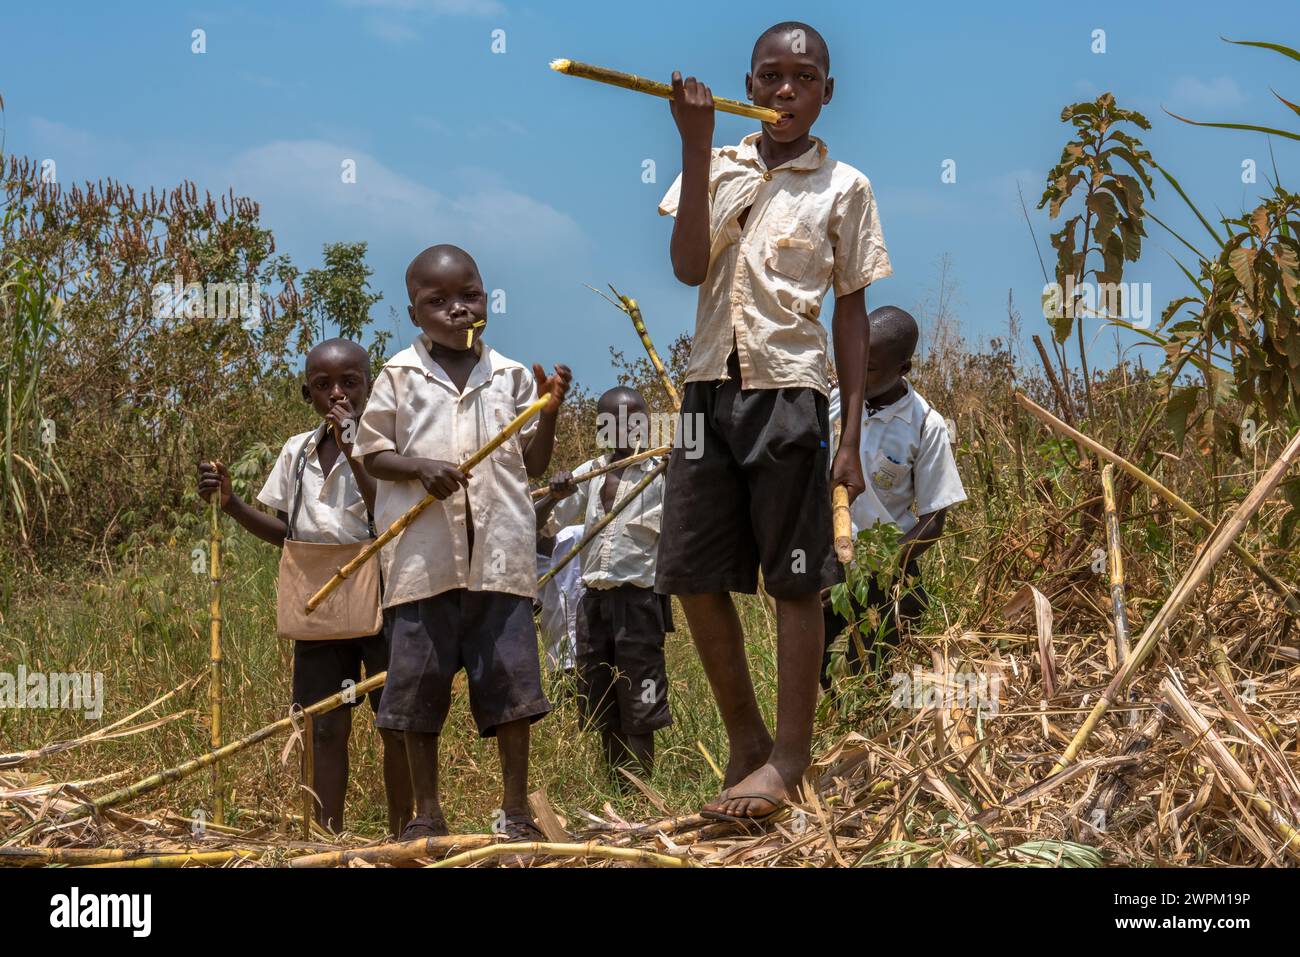 Young school boys eating sugar cane on their way back home from school, Masindi, Uganda, East Africa, Africa Stock Photo